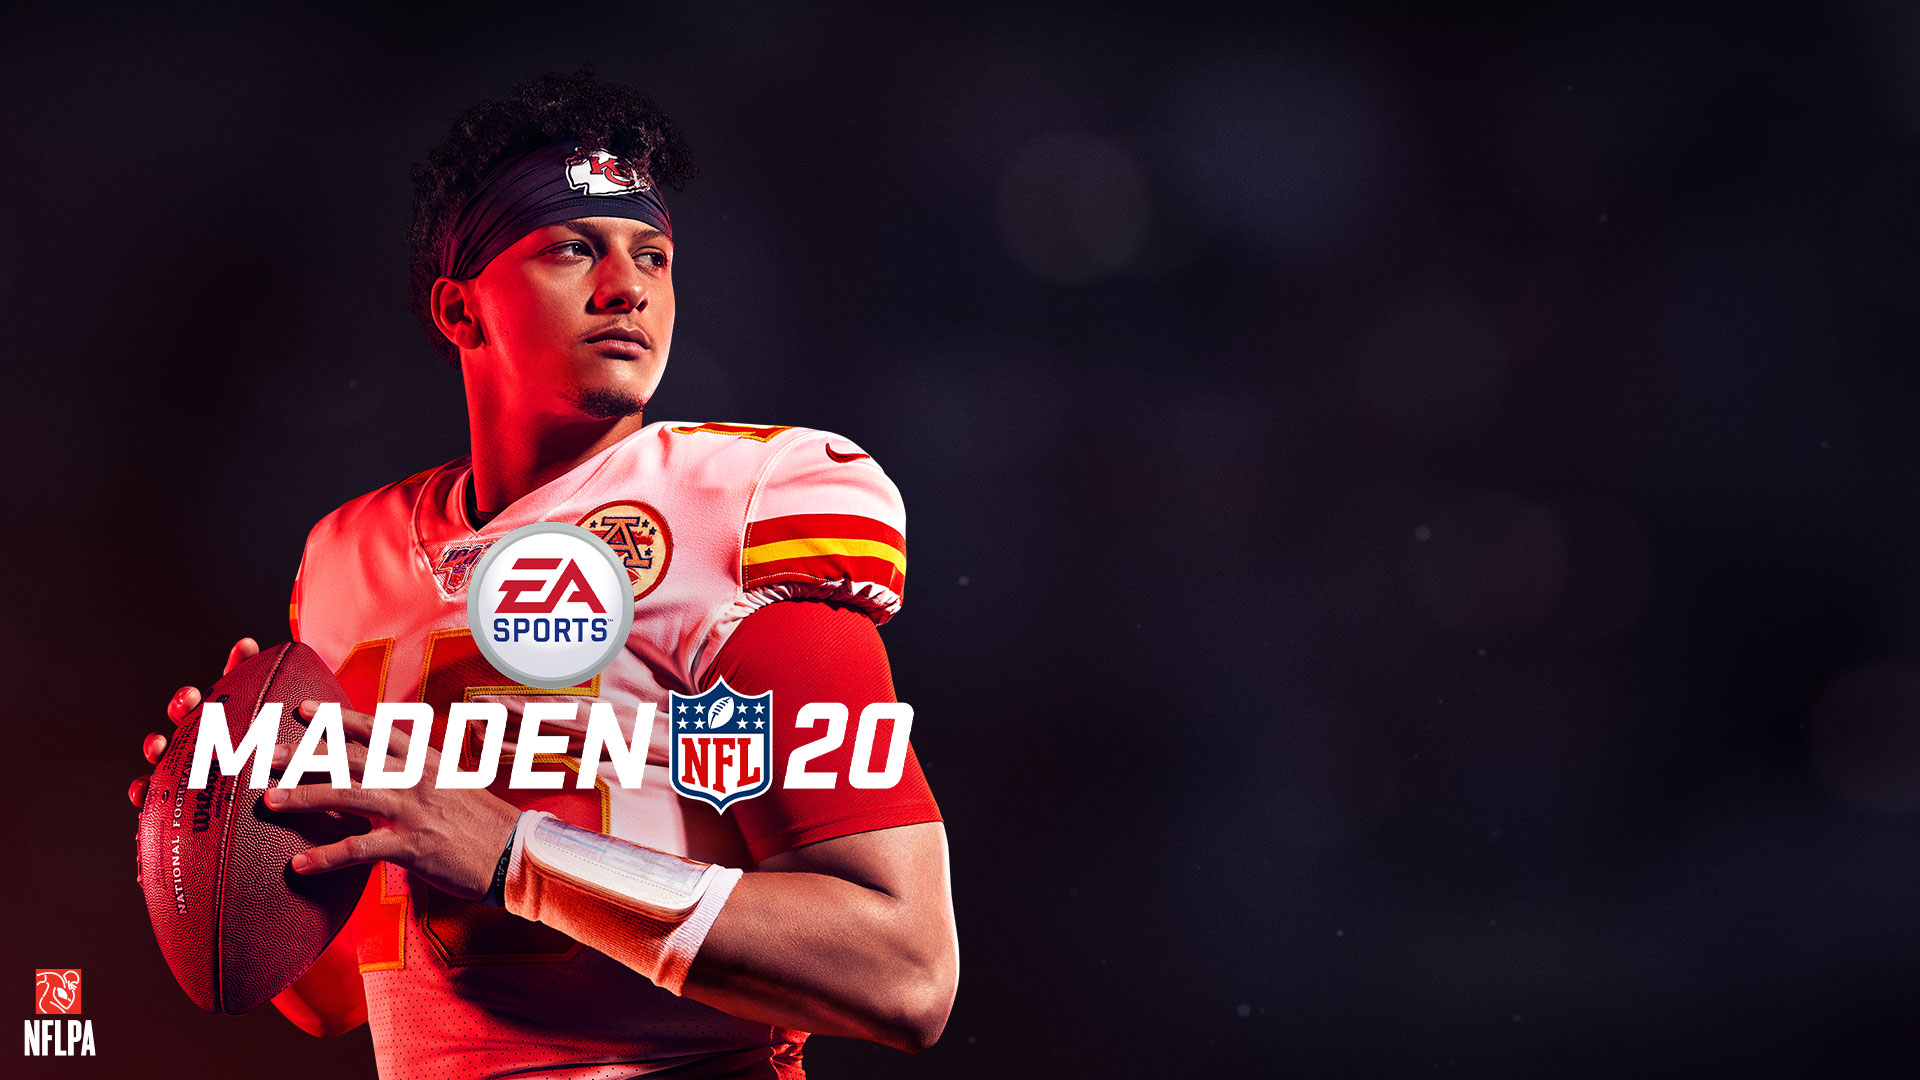 madden 20 for xbox one s